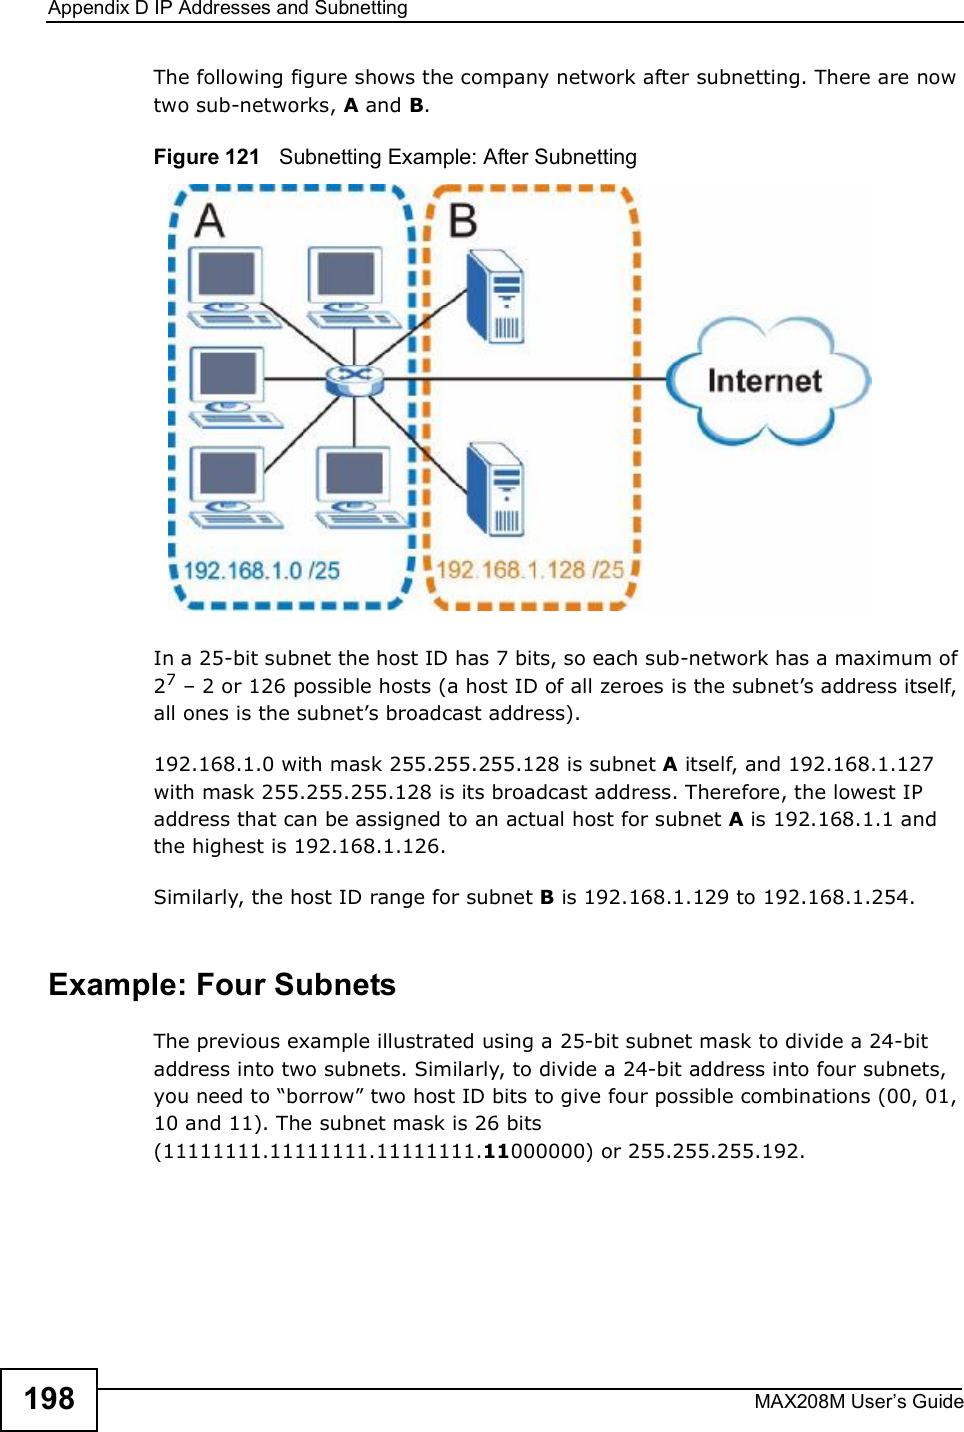 Appendix DIP Addresses and SubnettingMAX208M User s Guide198The following figure shows the company network after subnetting. There are now two sub-networks, A and B. Figure 121   Subnetting Example: After SubnettingIn a 25-bit subnet the host ID has 7 bits, so each sub-network has a maximum of 27 $ 2 or 126 possible hosts (a host ID of all zeroes is the subnet s address itself, all ones is the subnet s broadcast address).192.168.1.0 with mask 255.255.255.128 is subnet A itself, and 192.168.1.127 with mask 255.255.255.128 is its broadcast address. Therefore, the lowest IP address that can be assigned to an actual host for subnet A is 192.168.1.1 and the highest is 192.168.1.126. Similarly, the host ID range for subnet B is 192.168.1.129 to 192.168.1.254.Example: Four Subnets The previous example illustrated using a 25-bit subnet mask to divide a 24-bit address into two subnets. Similarly, to divide a 24-bit address into four subnets, you need to &quot;borrow# two host ID bits to give four possible combinations (00, 01, 10 and 11). The subnet mask is 26 bits (11111111.11111111.11111111.11000000) or 255.255.255.192. 